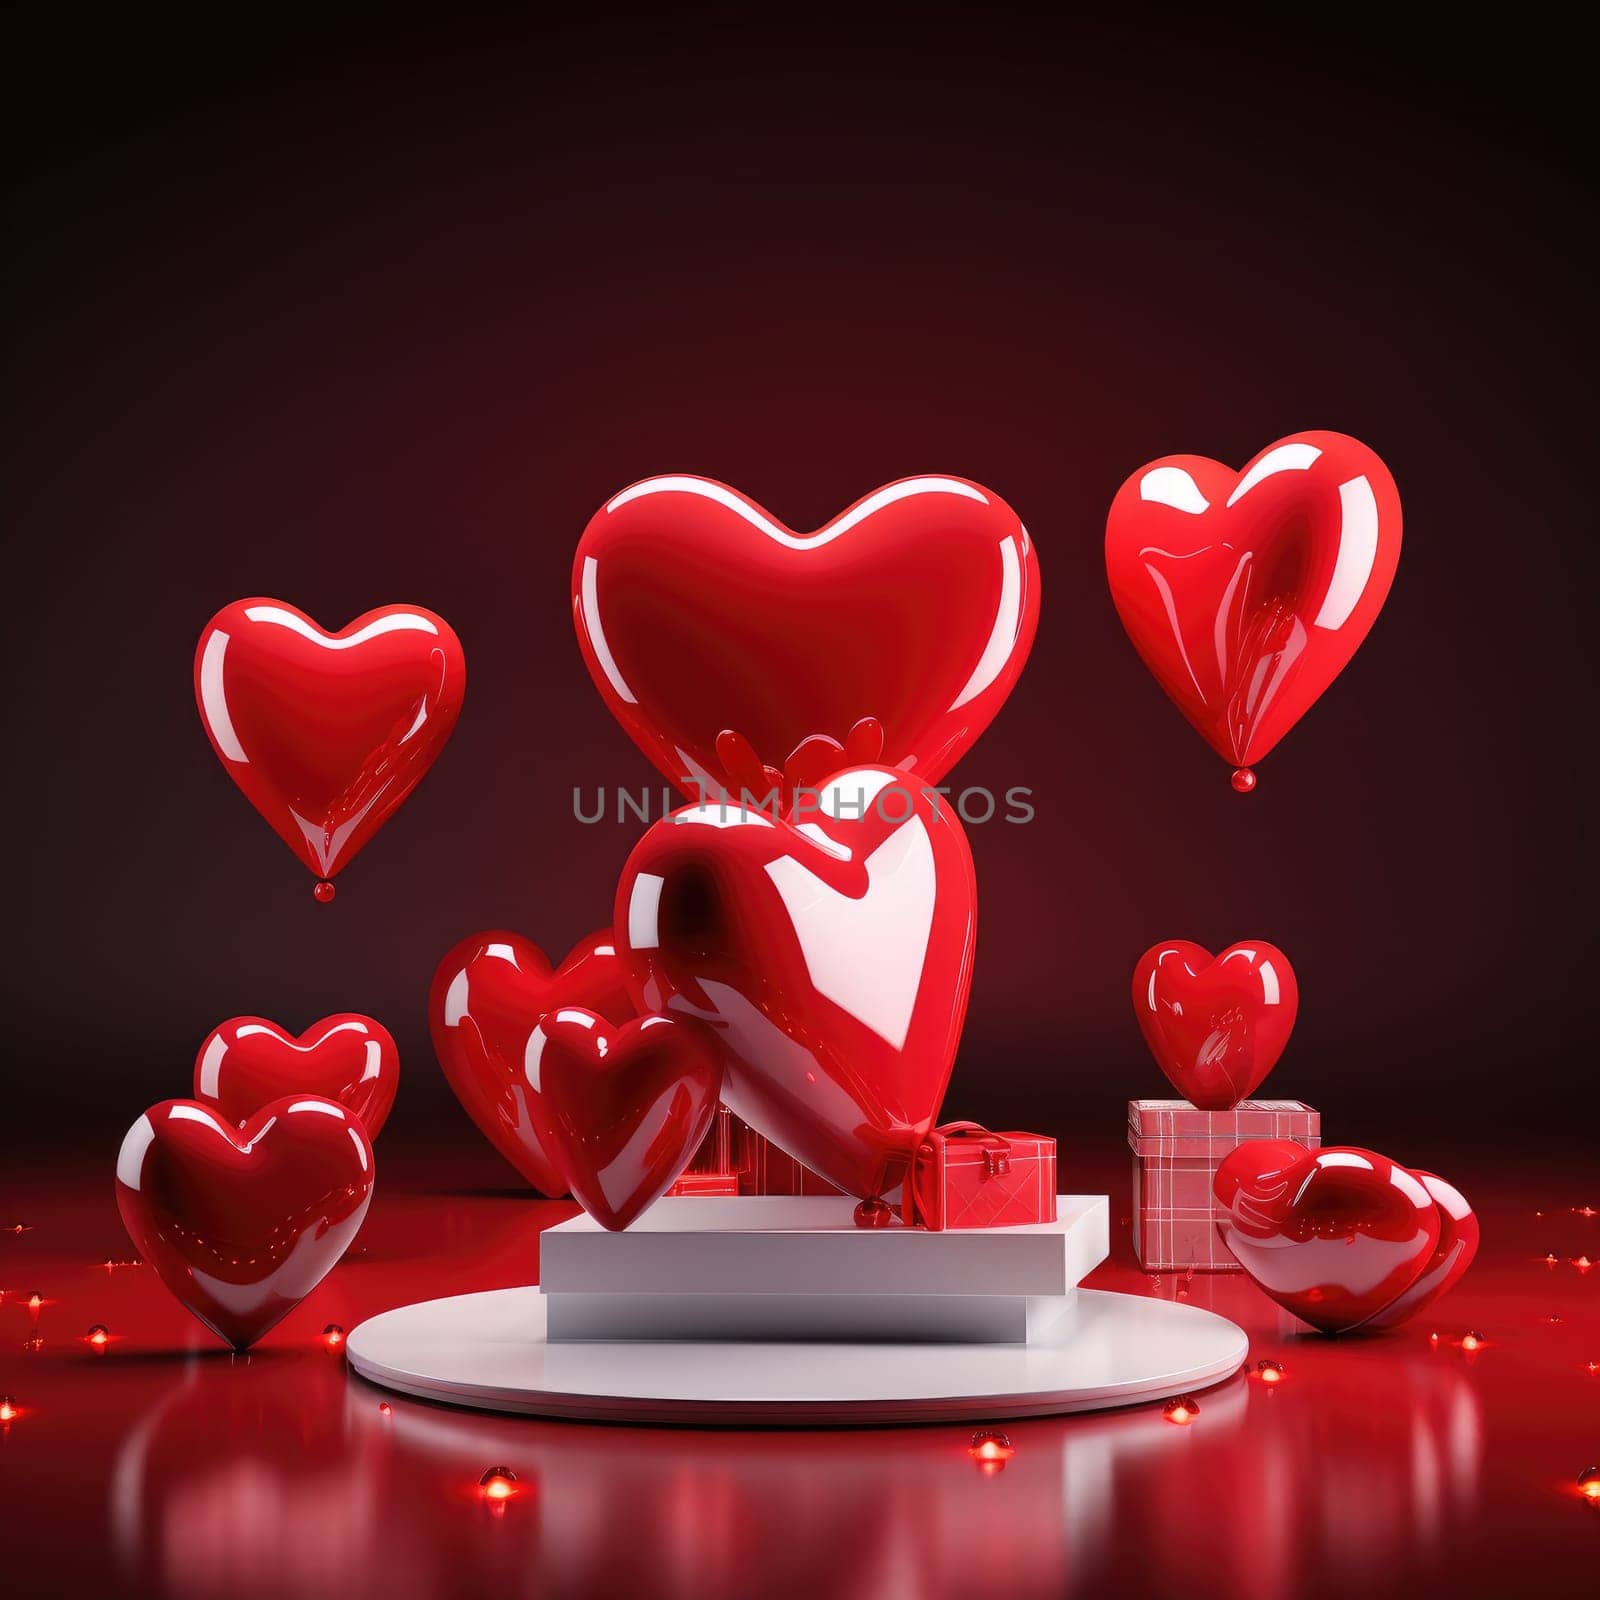 Romantic Heart Shaped Balloons for Valentine's Day Celebration and Declaration of Love.